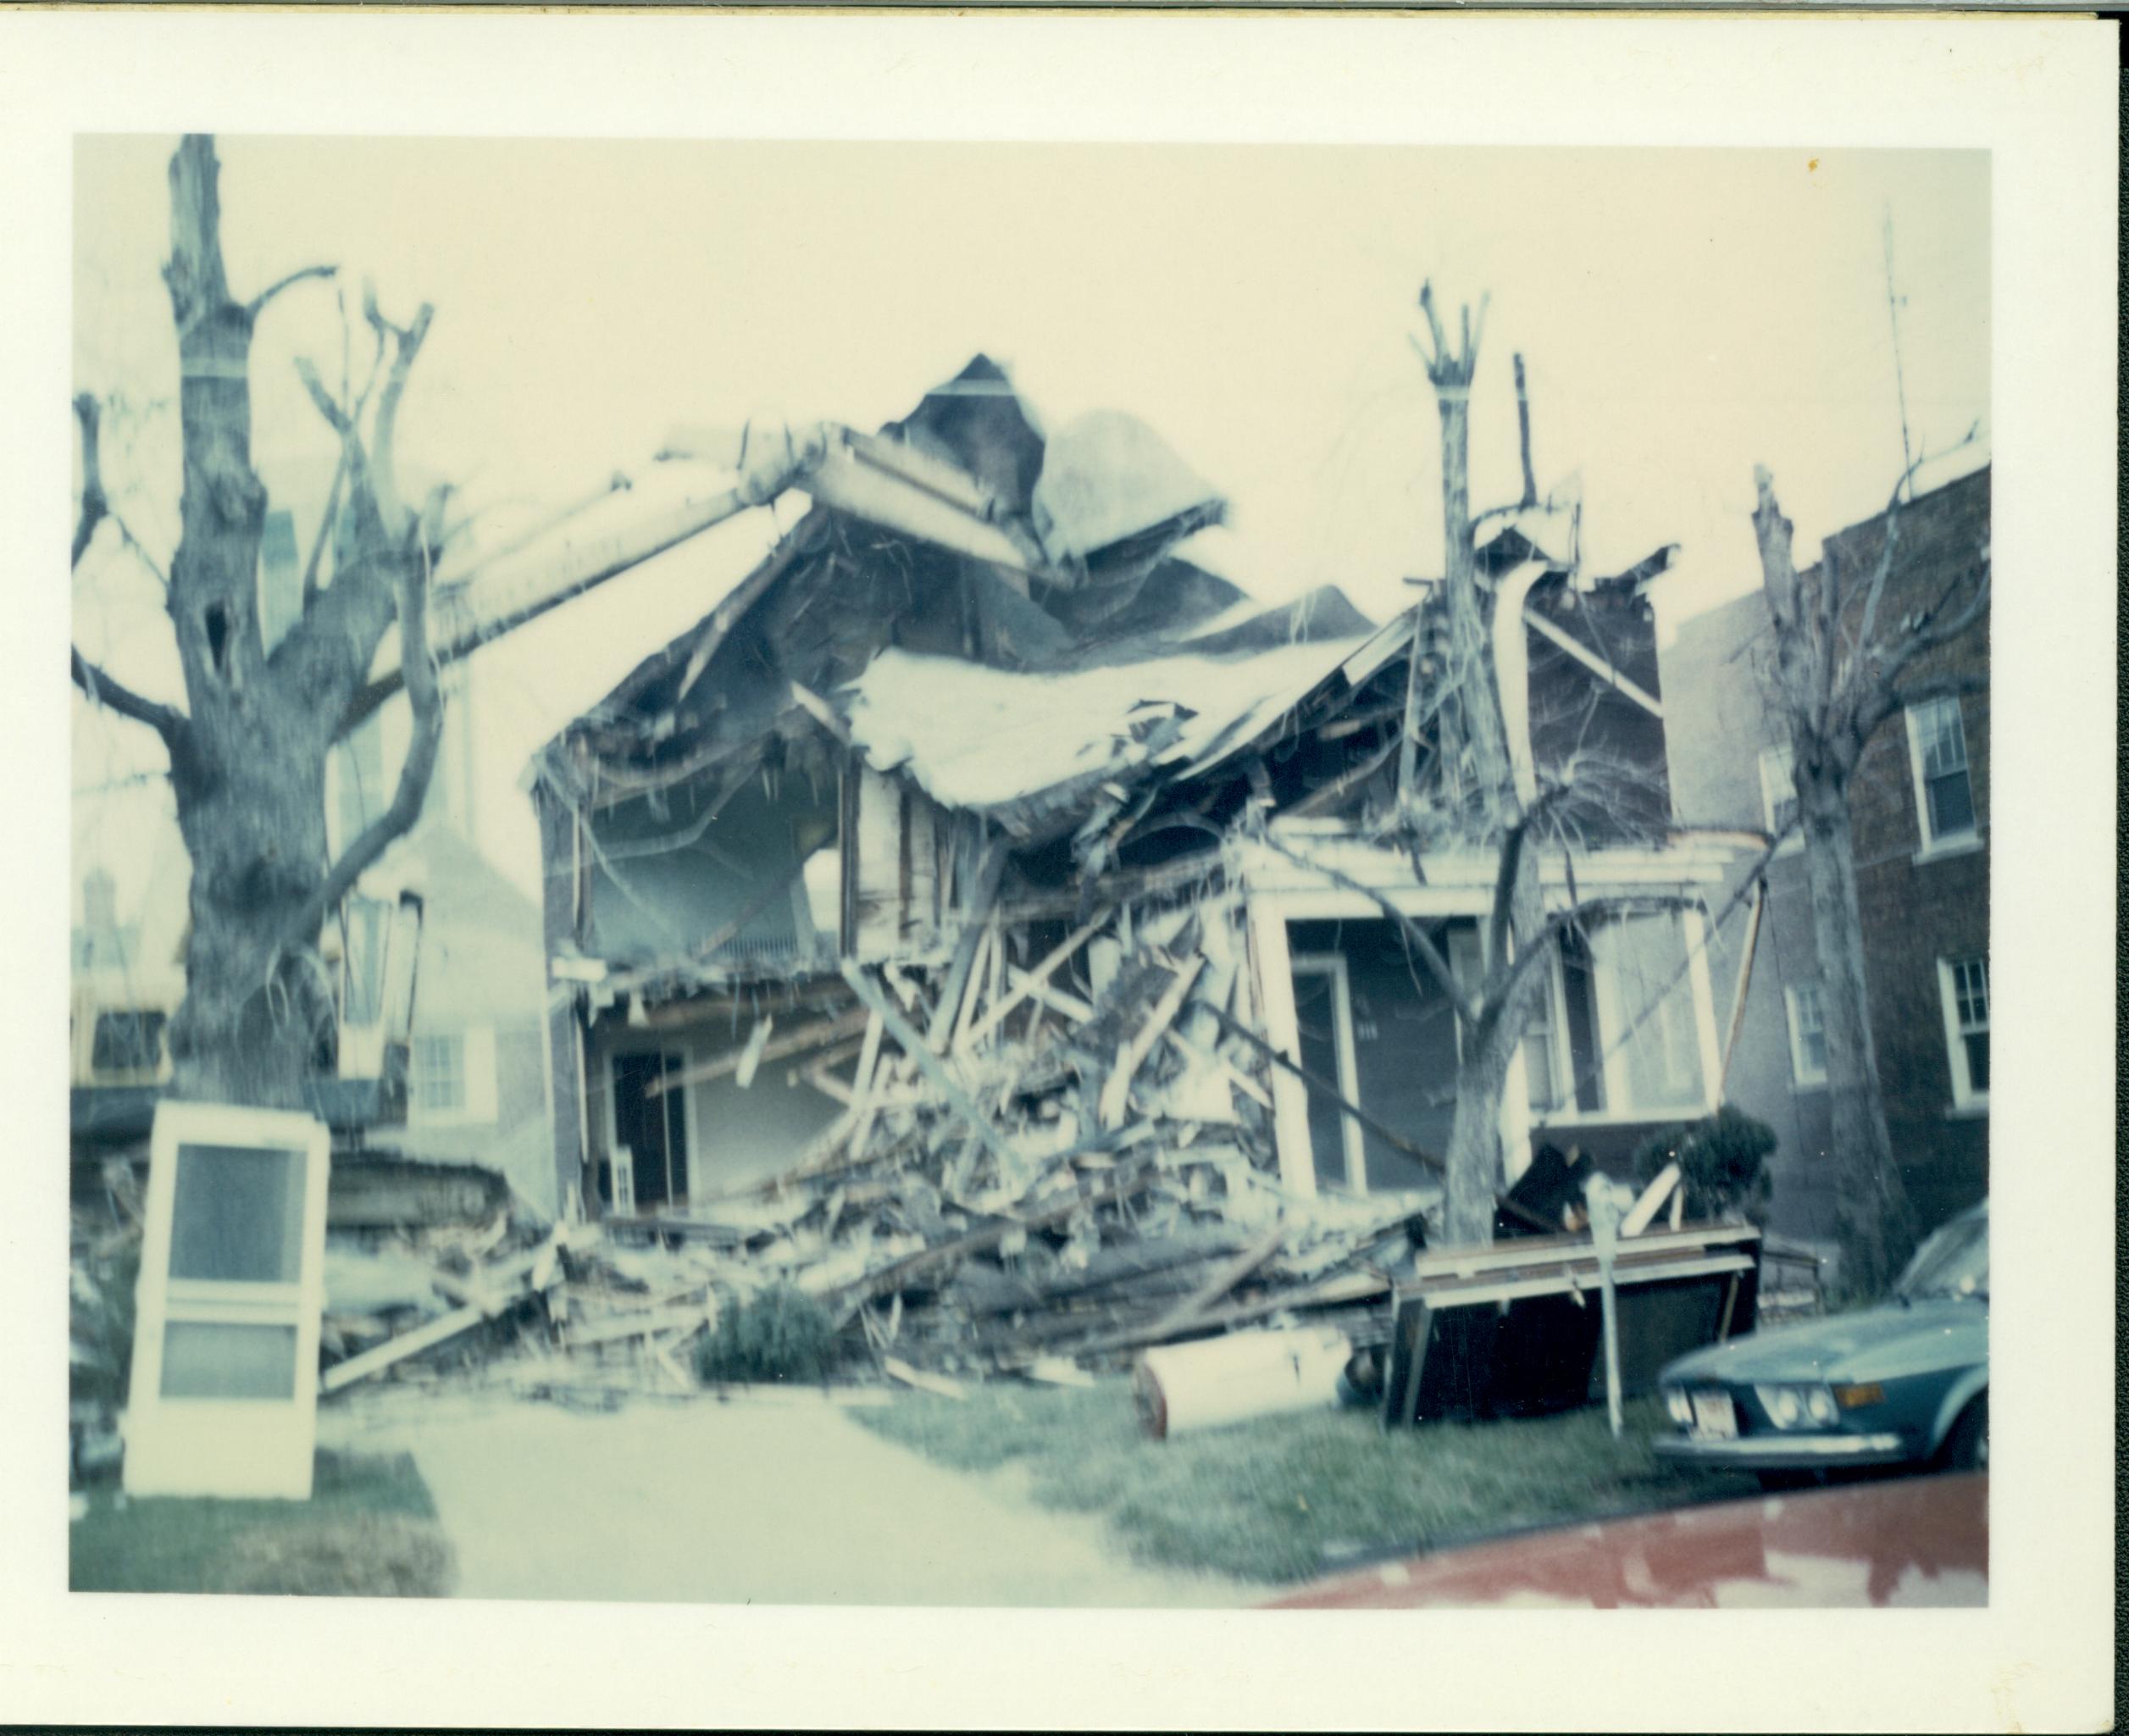 House owned by William Hermes in process of being razed. Brick building on right owned by Herman Hofferkamp.  Hilton Hotel tower semi-visible behind tree on left. Area is now Visitor Center. Looking North from Jackson Street Hermes, Hofferkamp, Hilton Hotel, razing, Visitor Center, Jackson Street